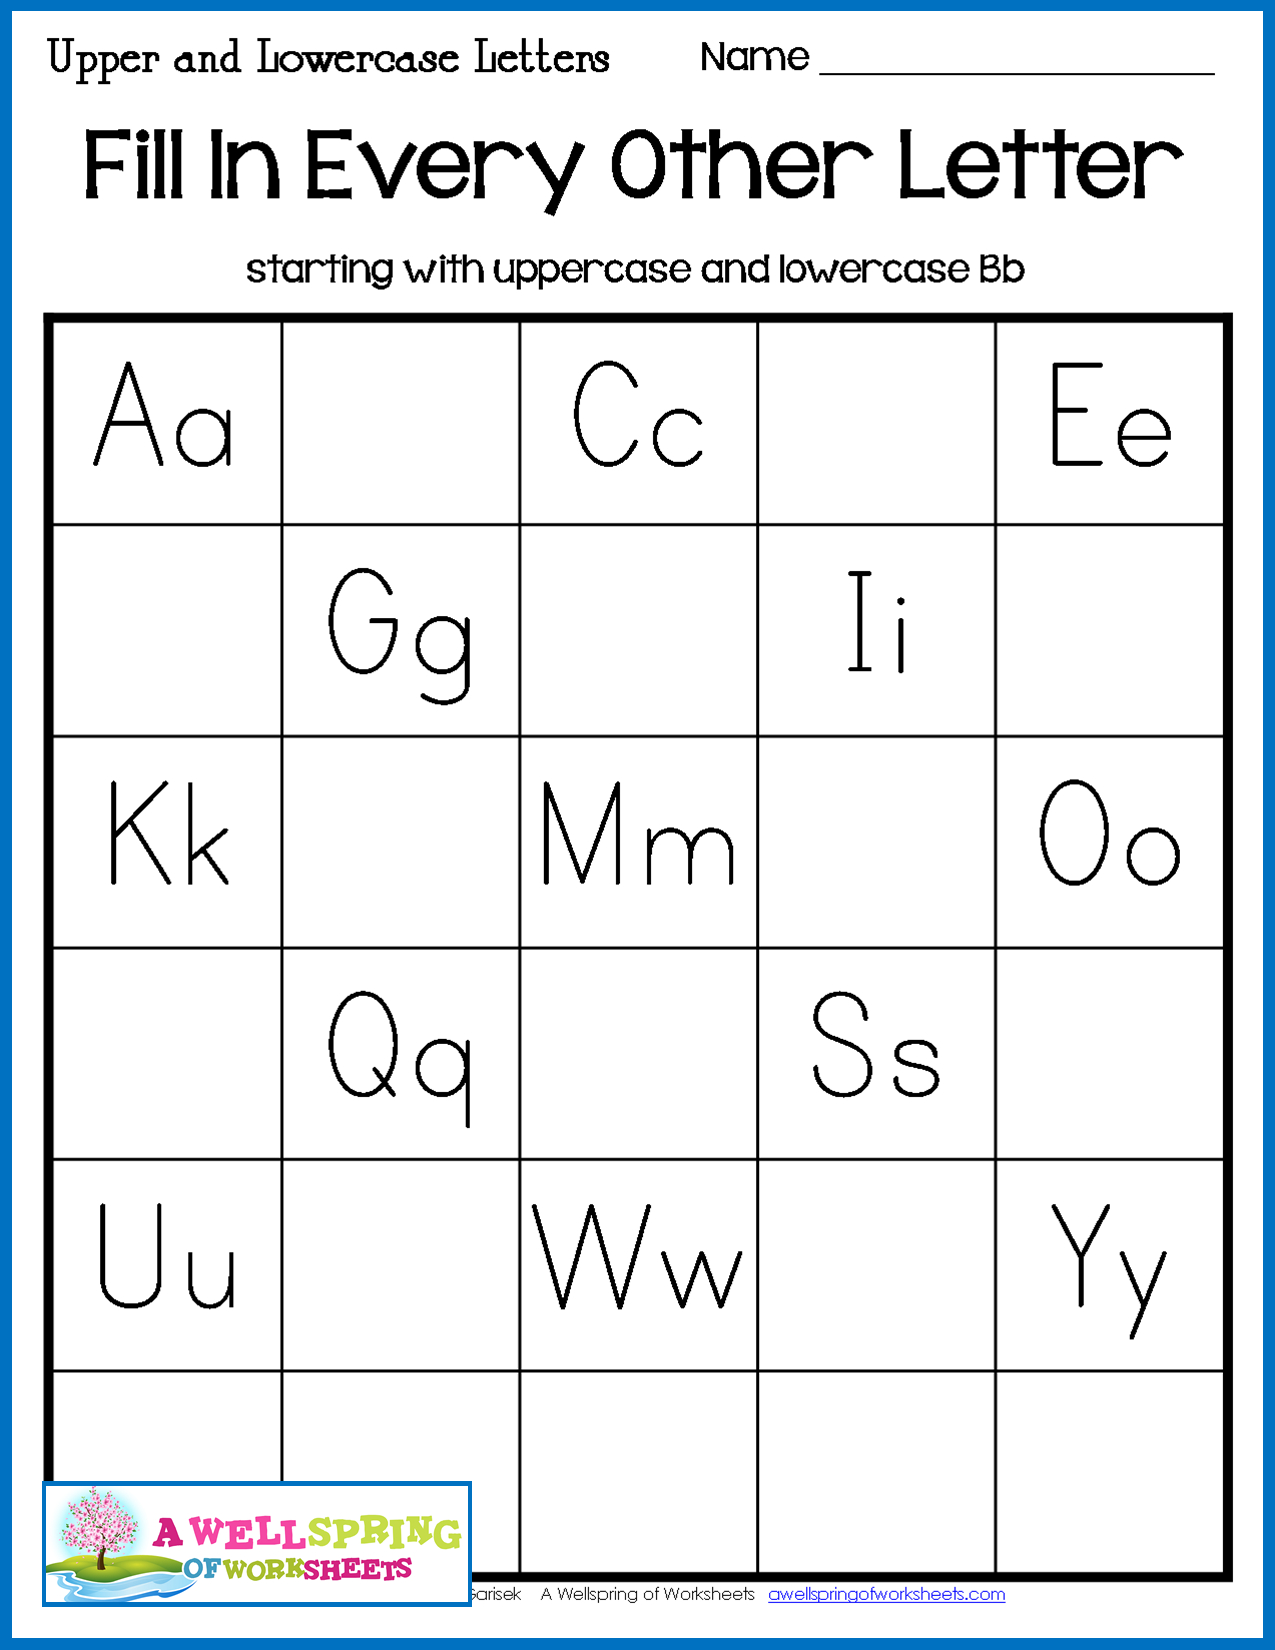 alphabet-sequencing-worksheets-7e8